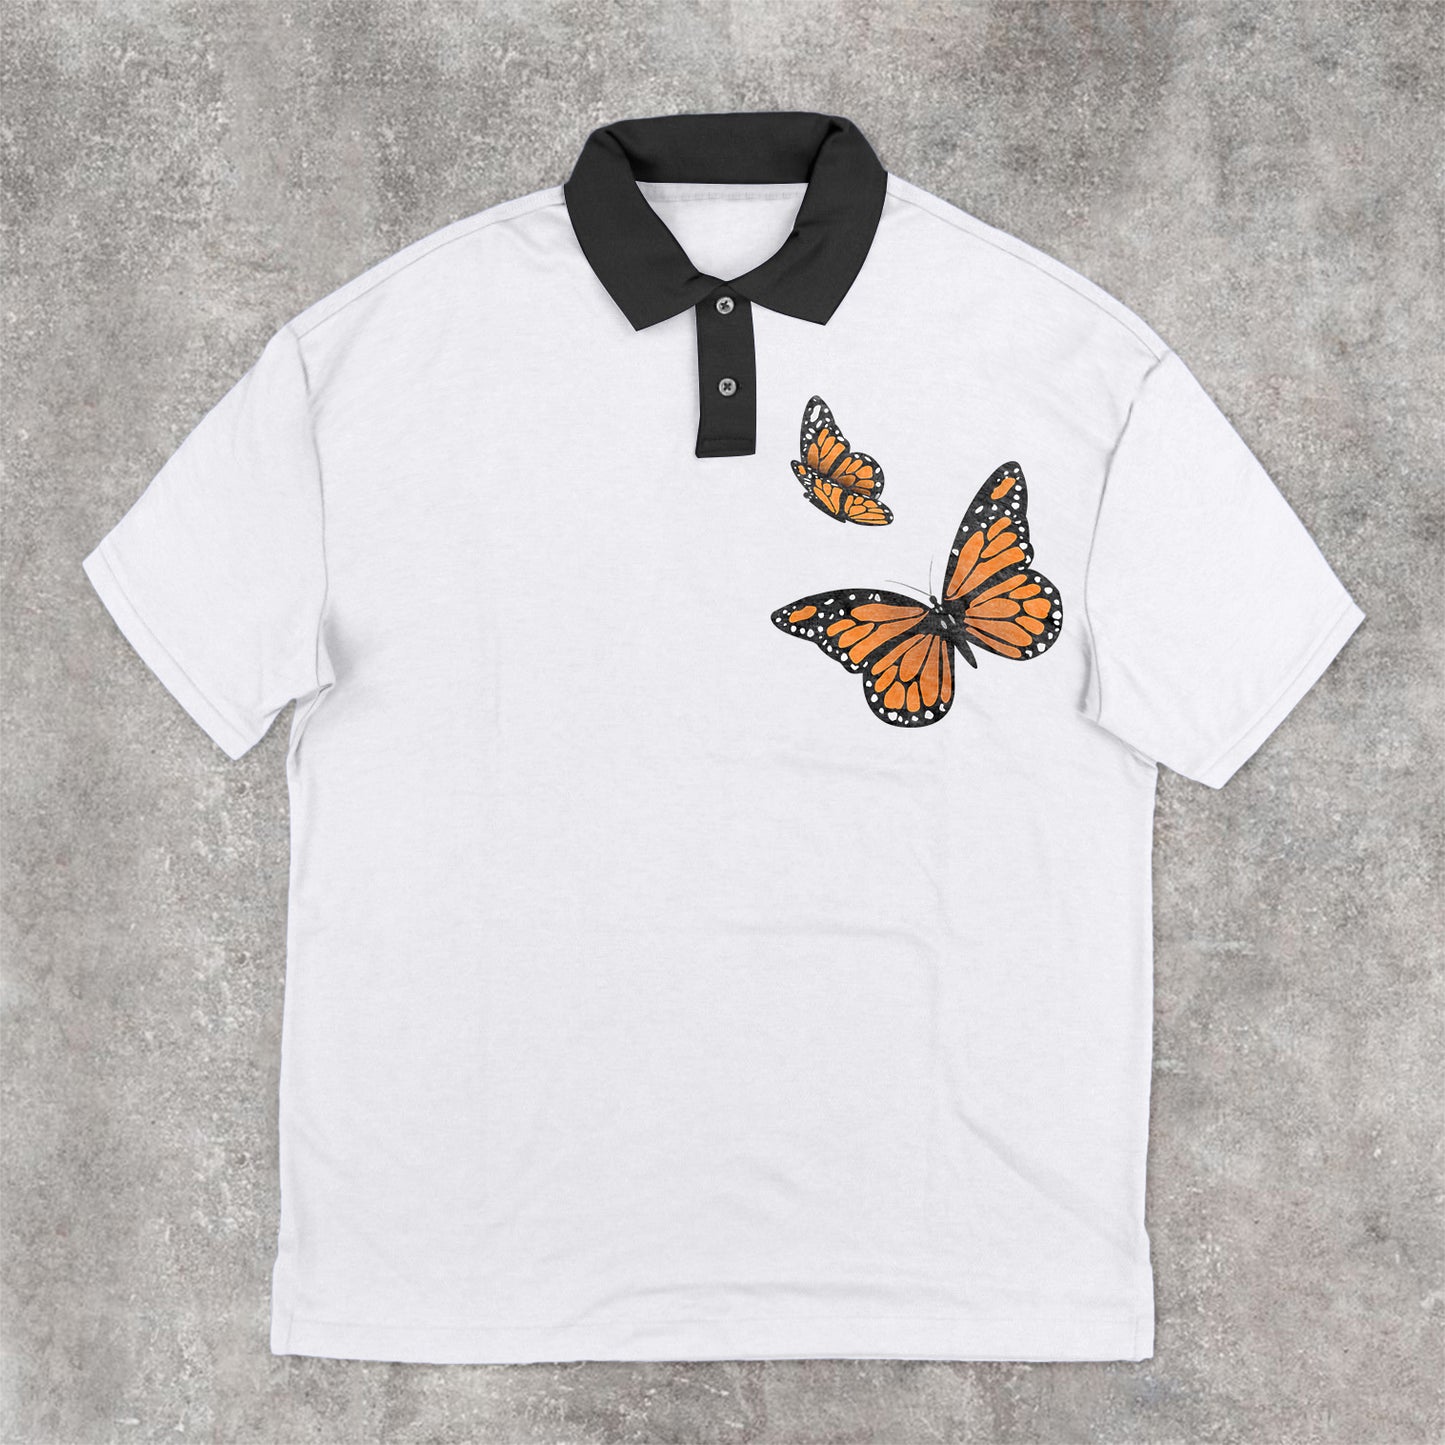 Preppy Fashion Vintage Butterfly Polo Shirt